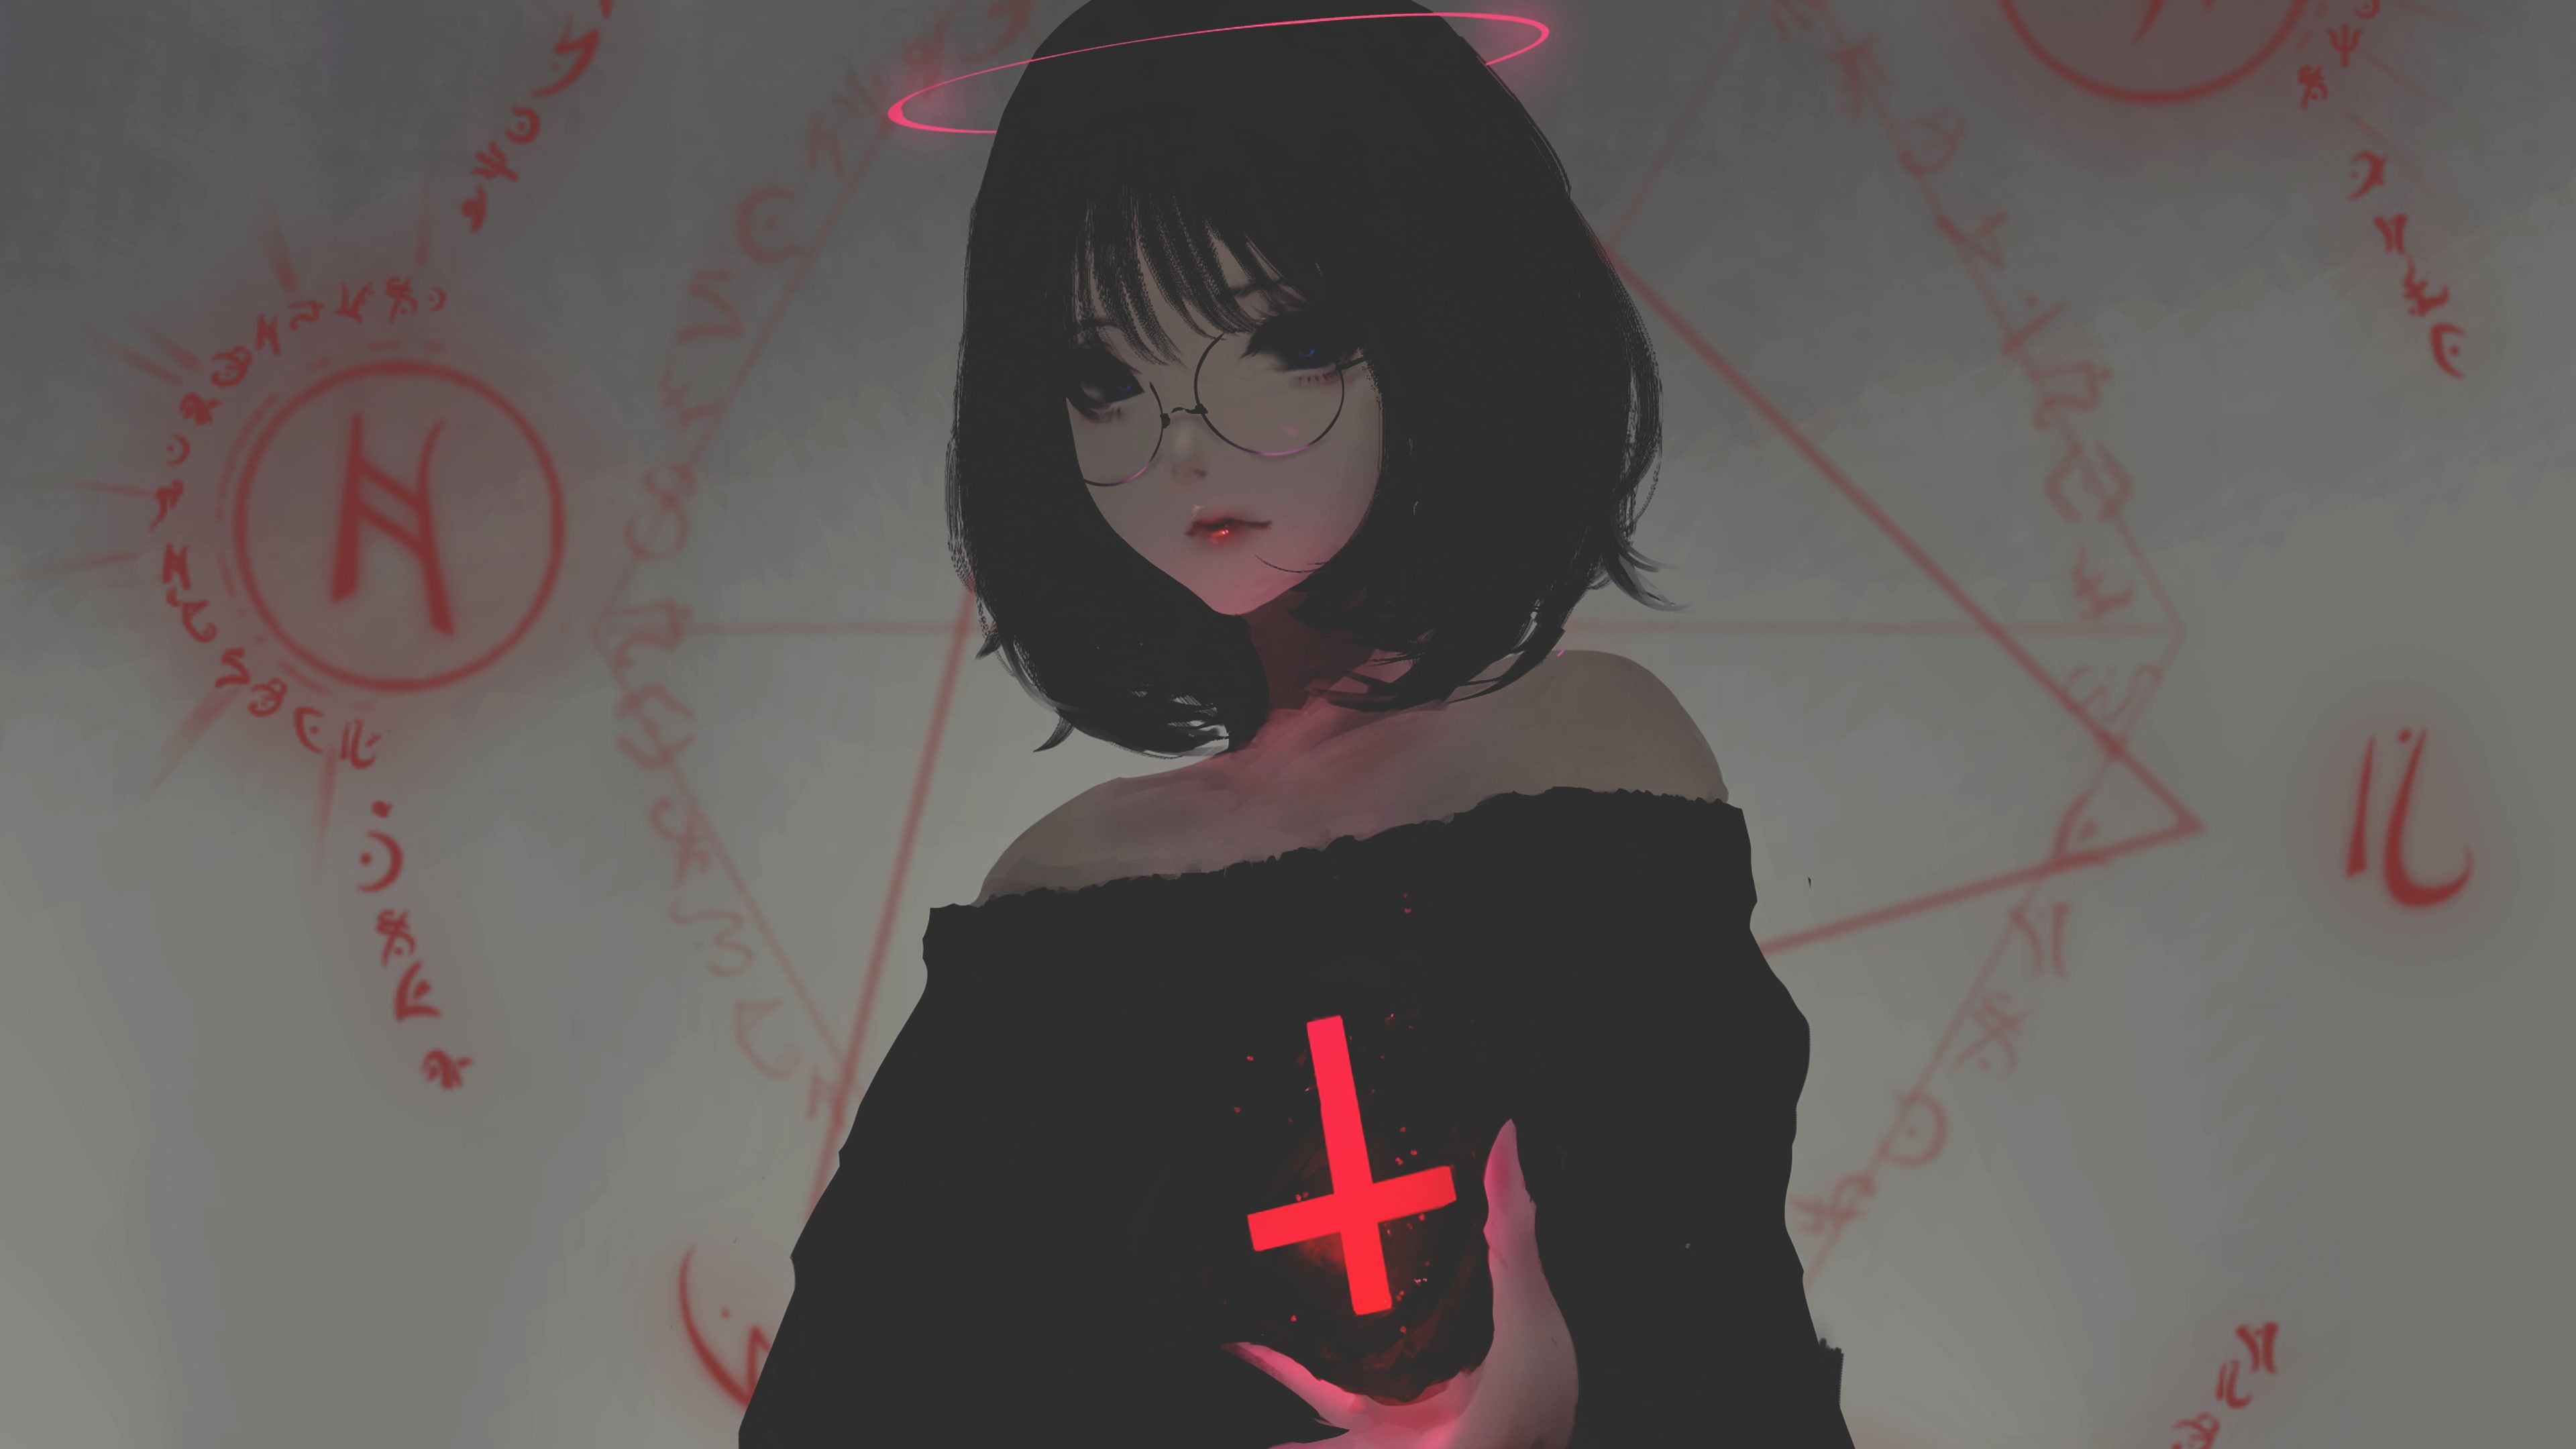 A black haired anime girl with glasses and a black dress, holding a red cross. - Emo, anime girl